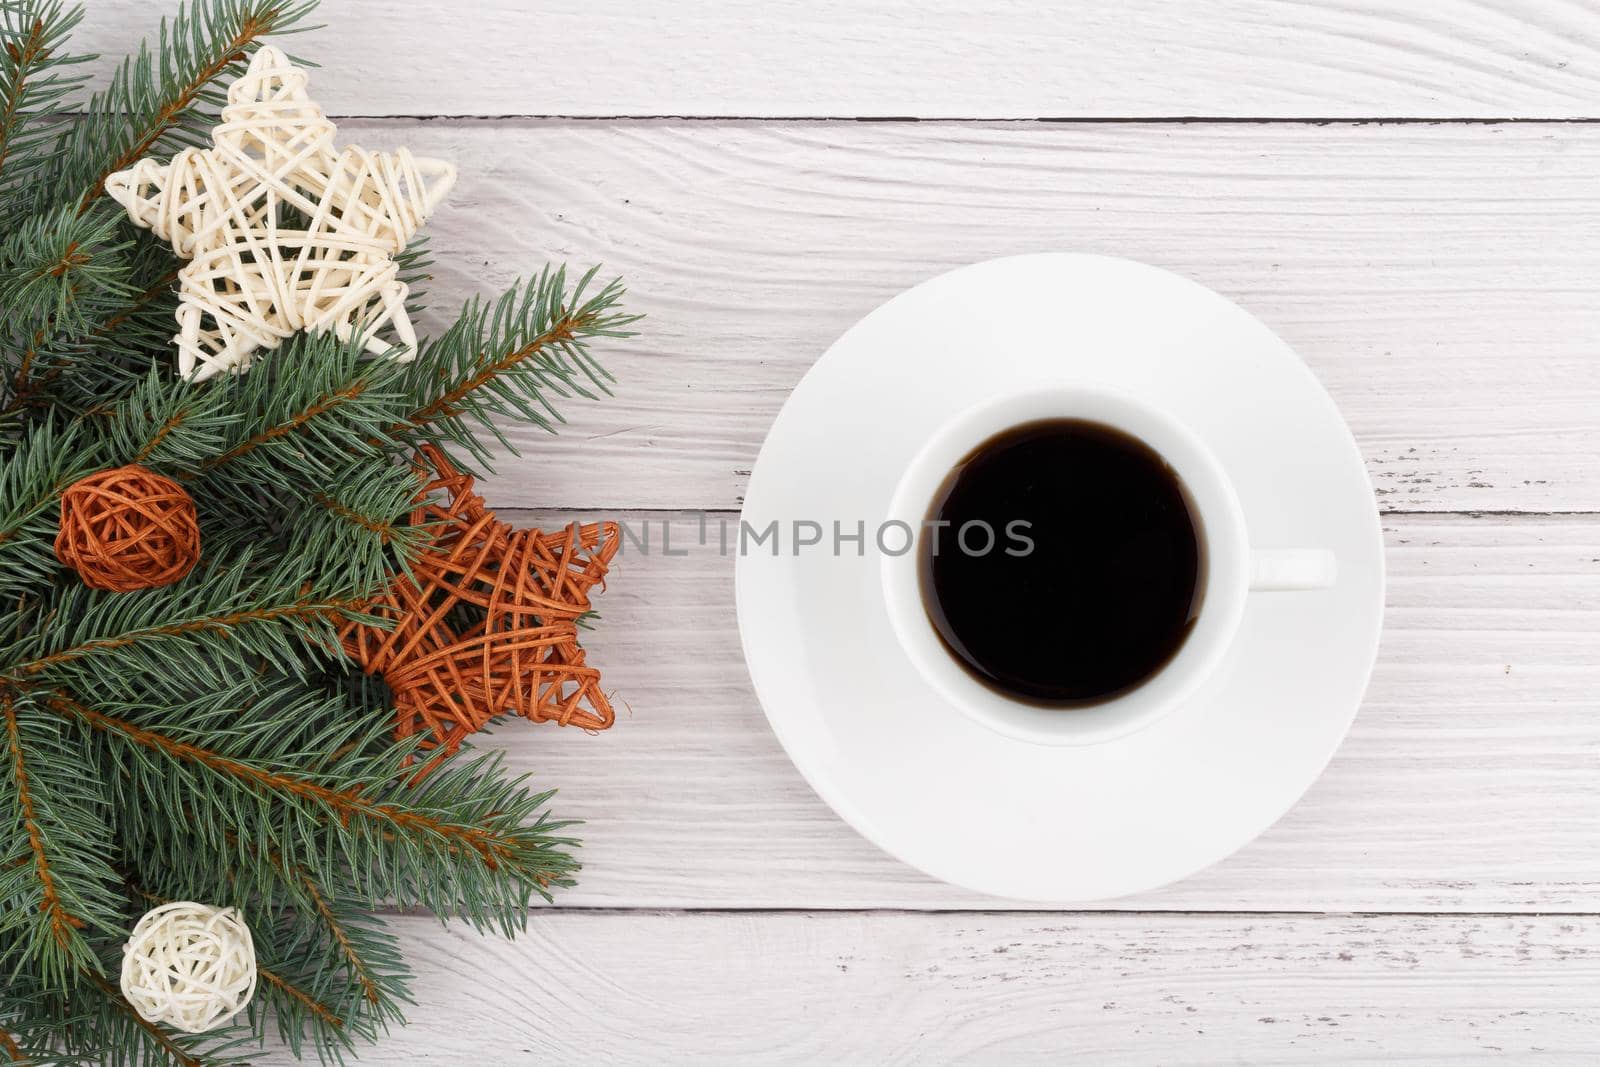 Top view of coffee cup on wooden table decorated with Christmas tree and toys by Senorina_Irina